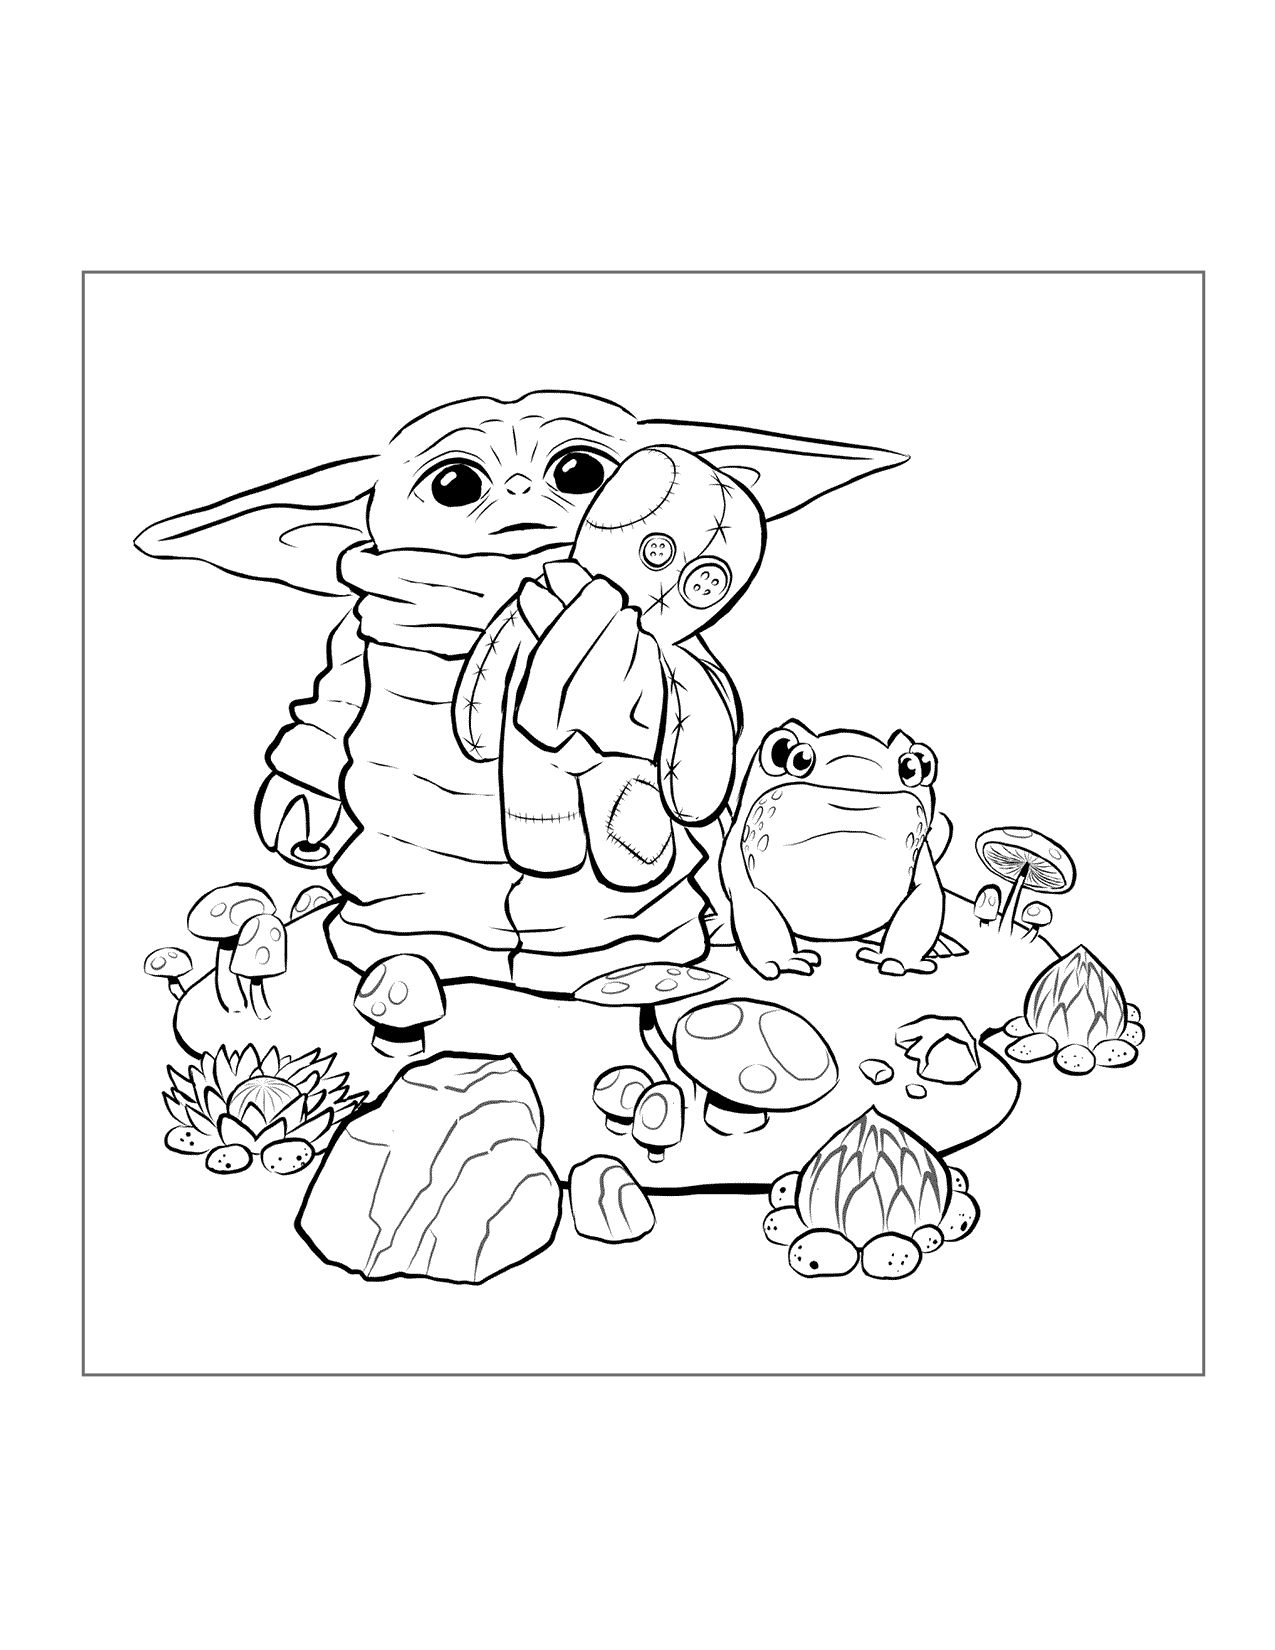 Baby Yoda Stuffed Toy Coloring Page